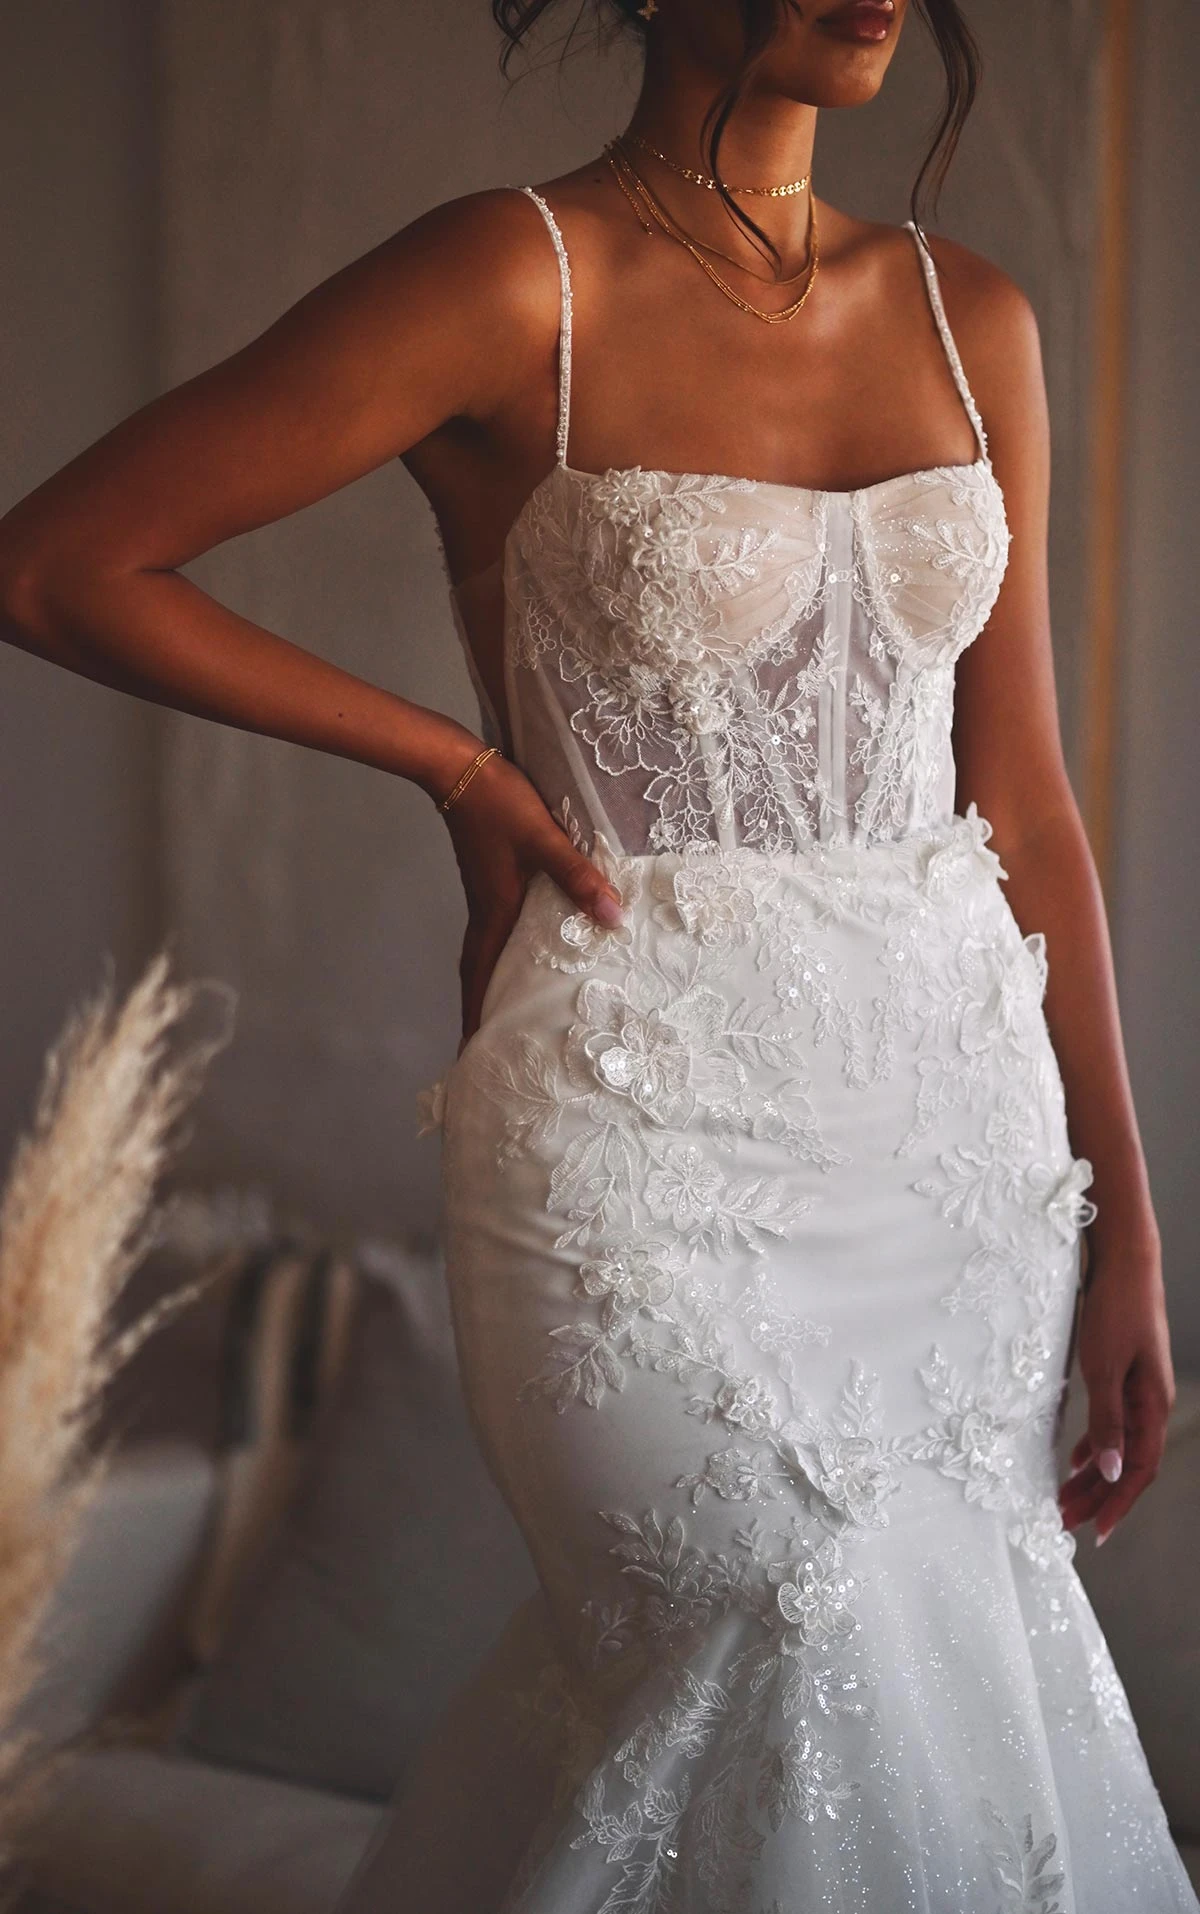 1488 Sparkling Lace Spaghetti Strap Wedding Dress with Corset Bustier Bodice  by Martina Liana